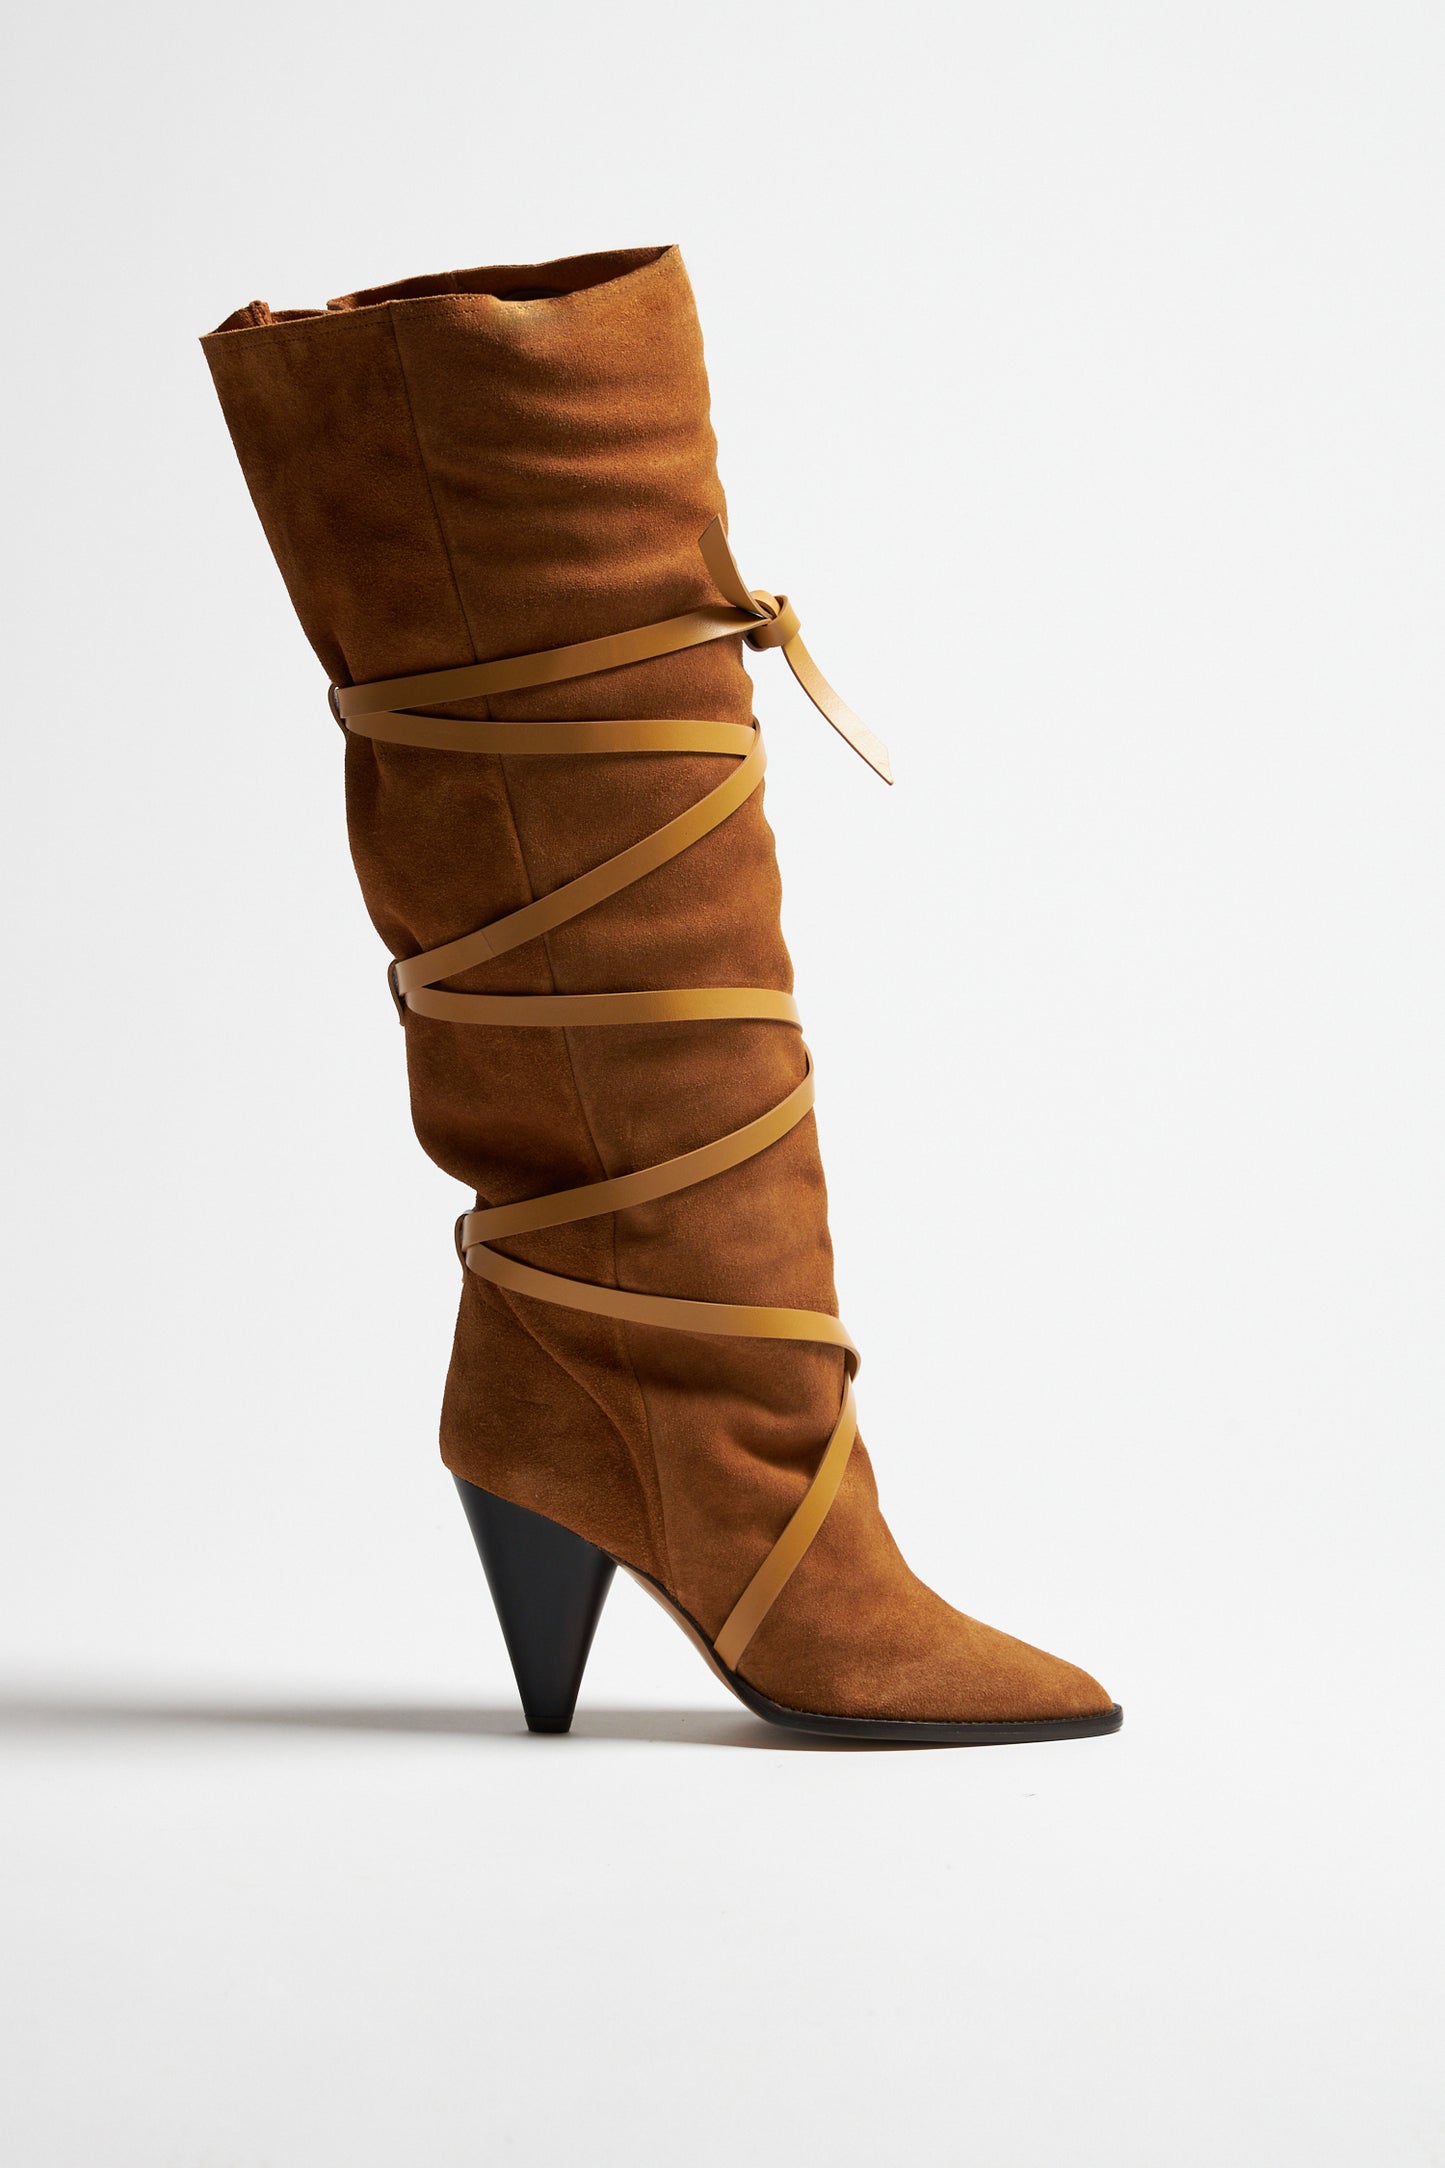 Stiefel Lophie in TerracottaIsabel Marant - Anita Hass